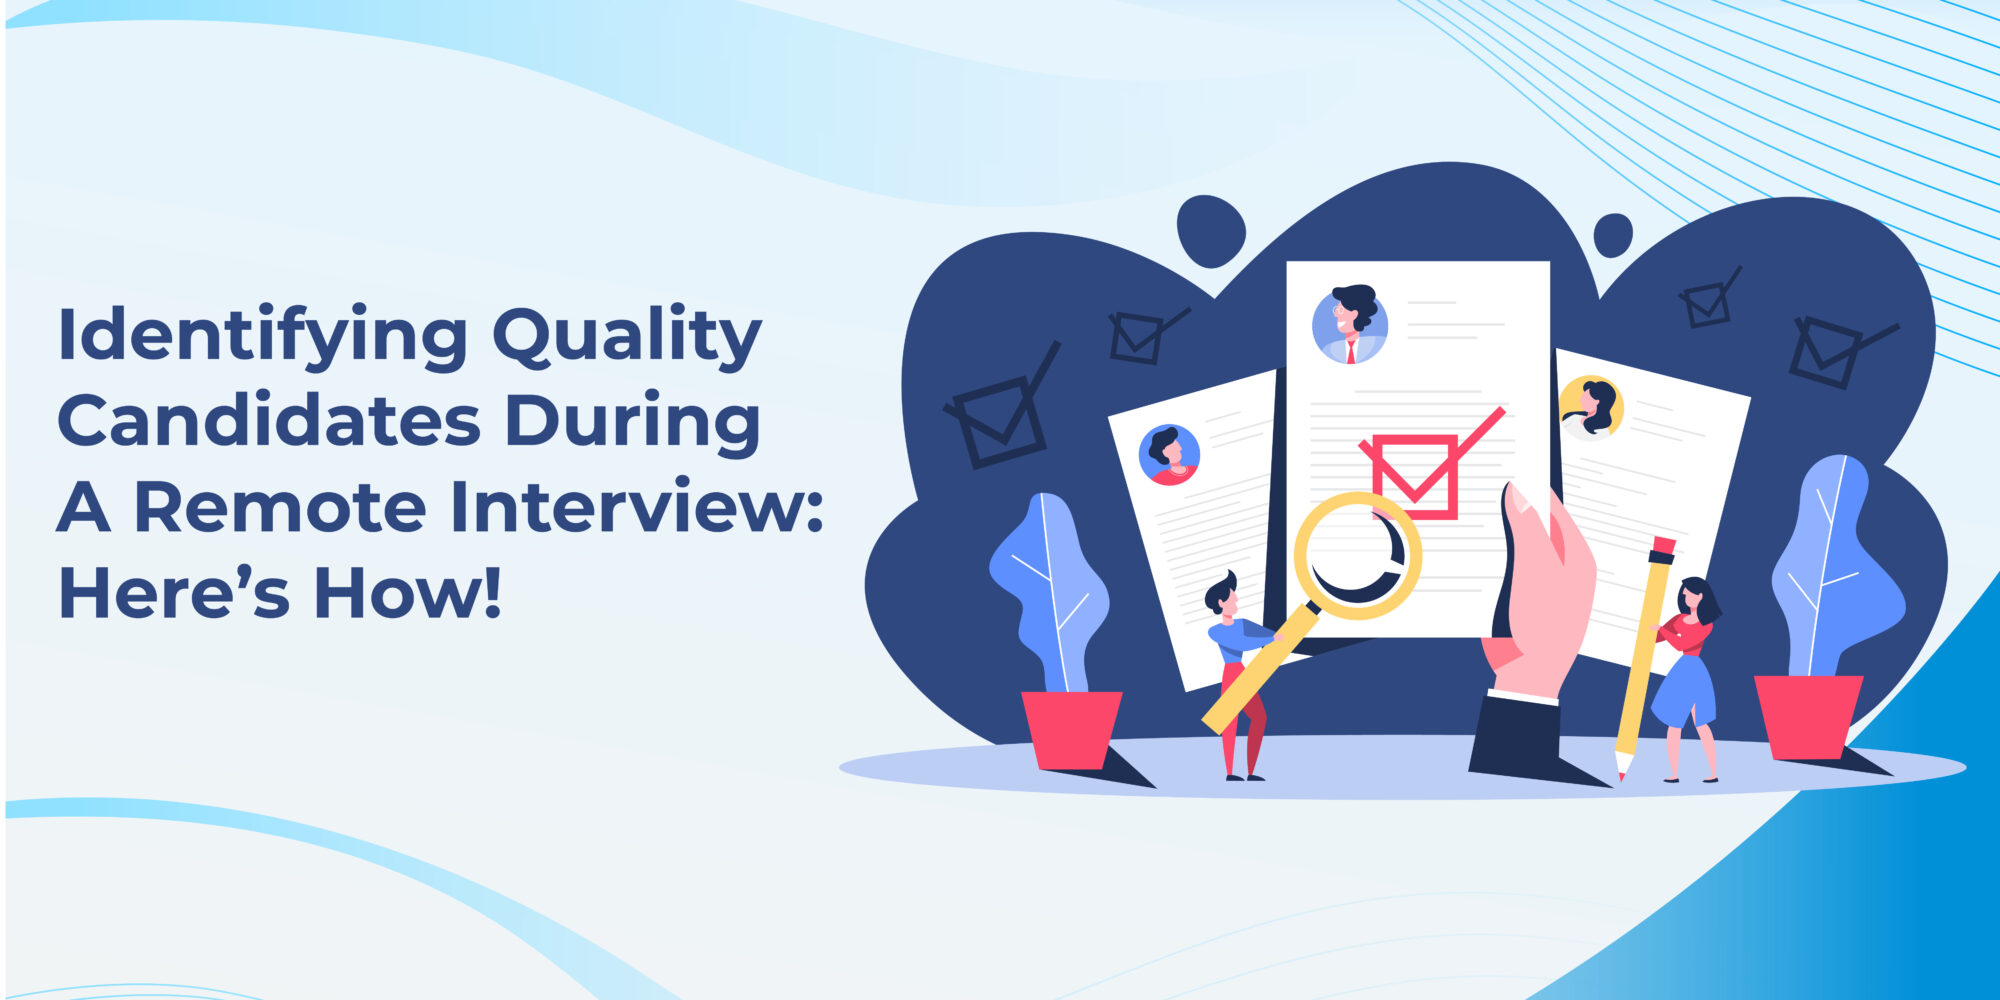 Identifying Quality Candidates During A Remote Interview